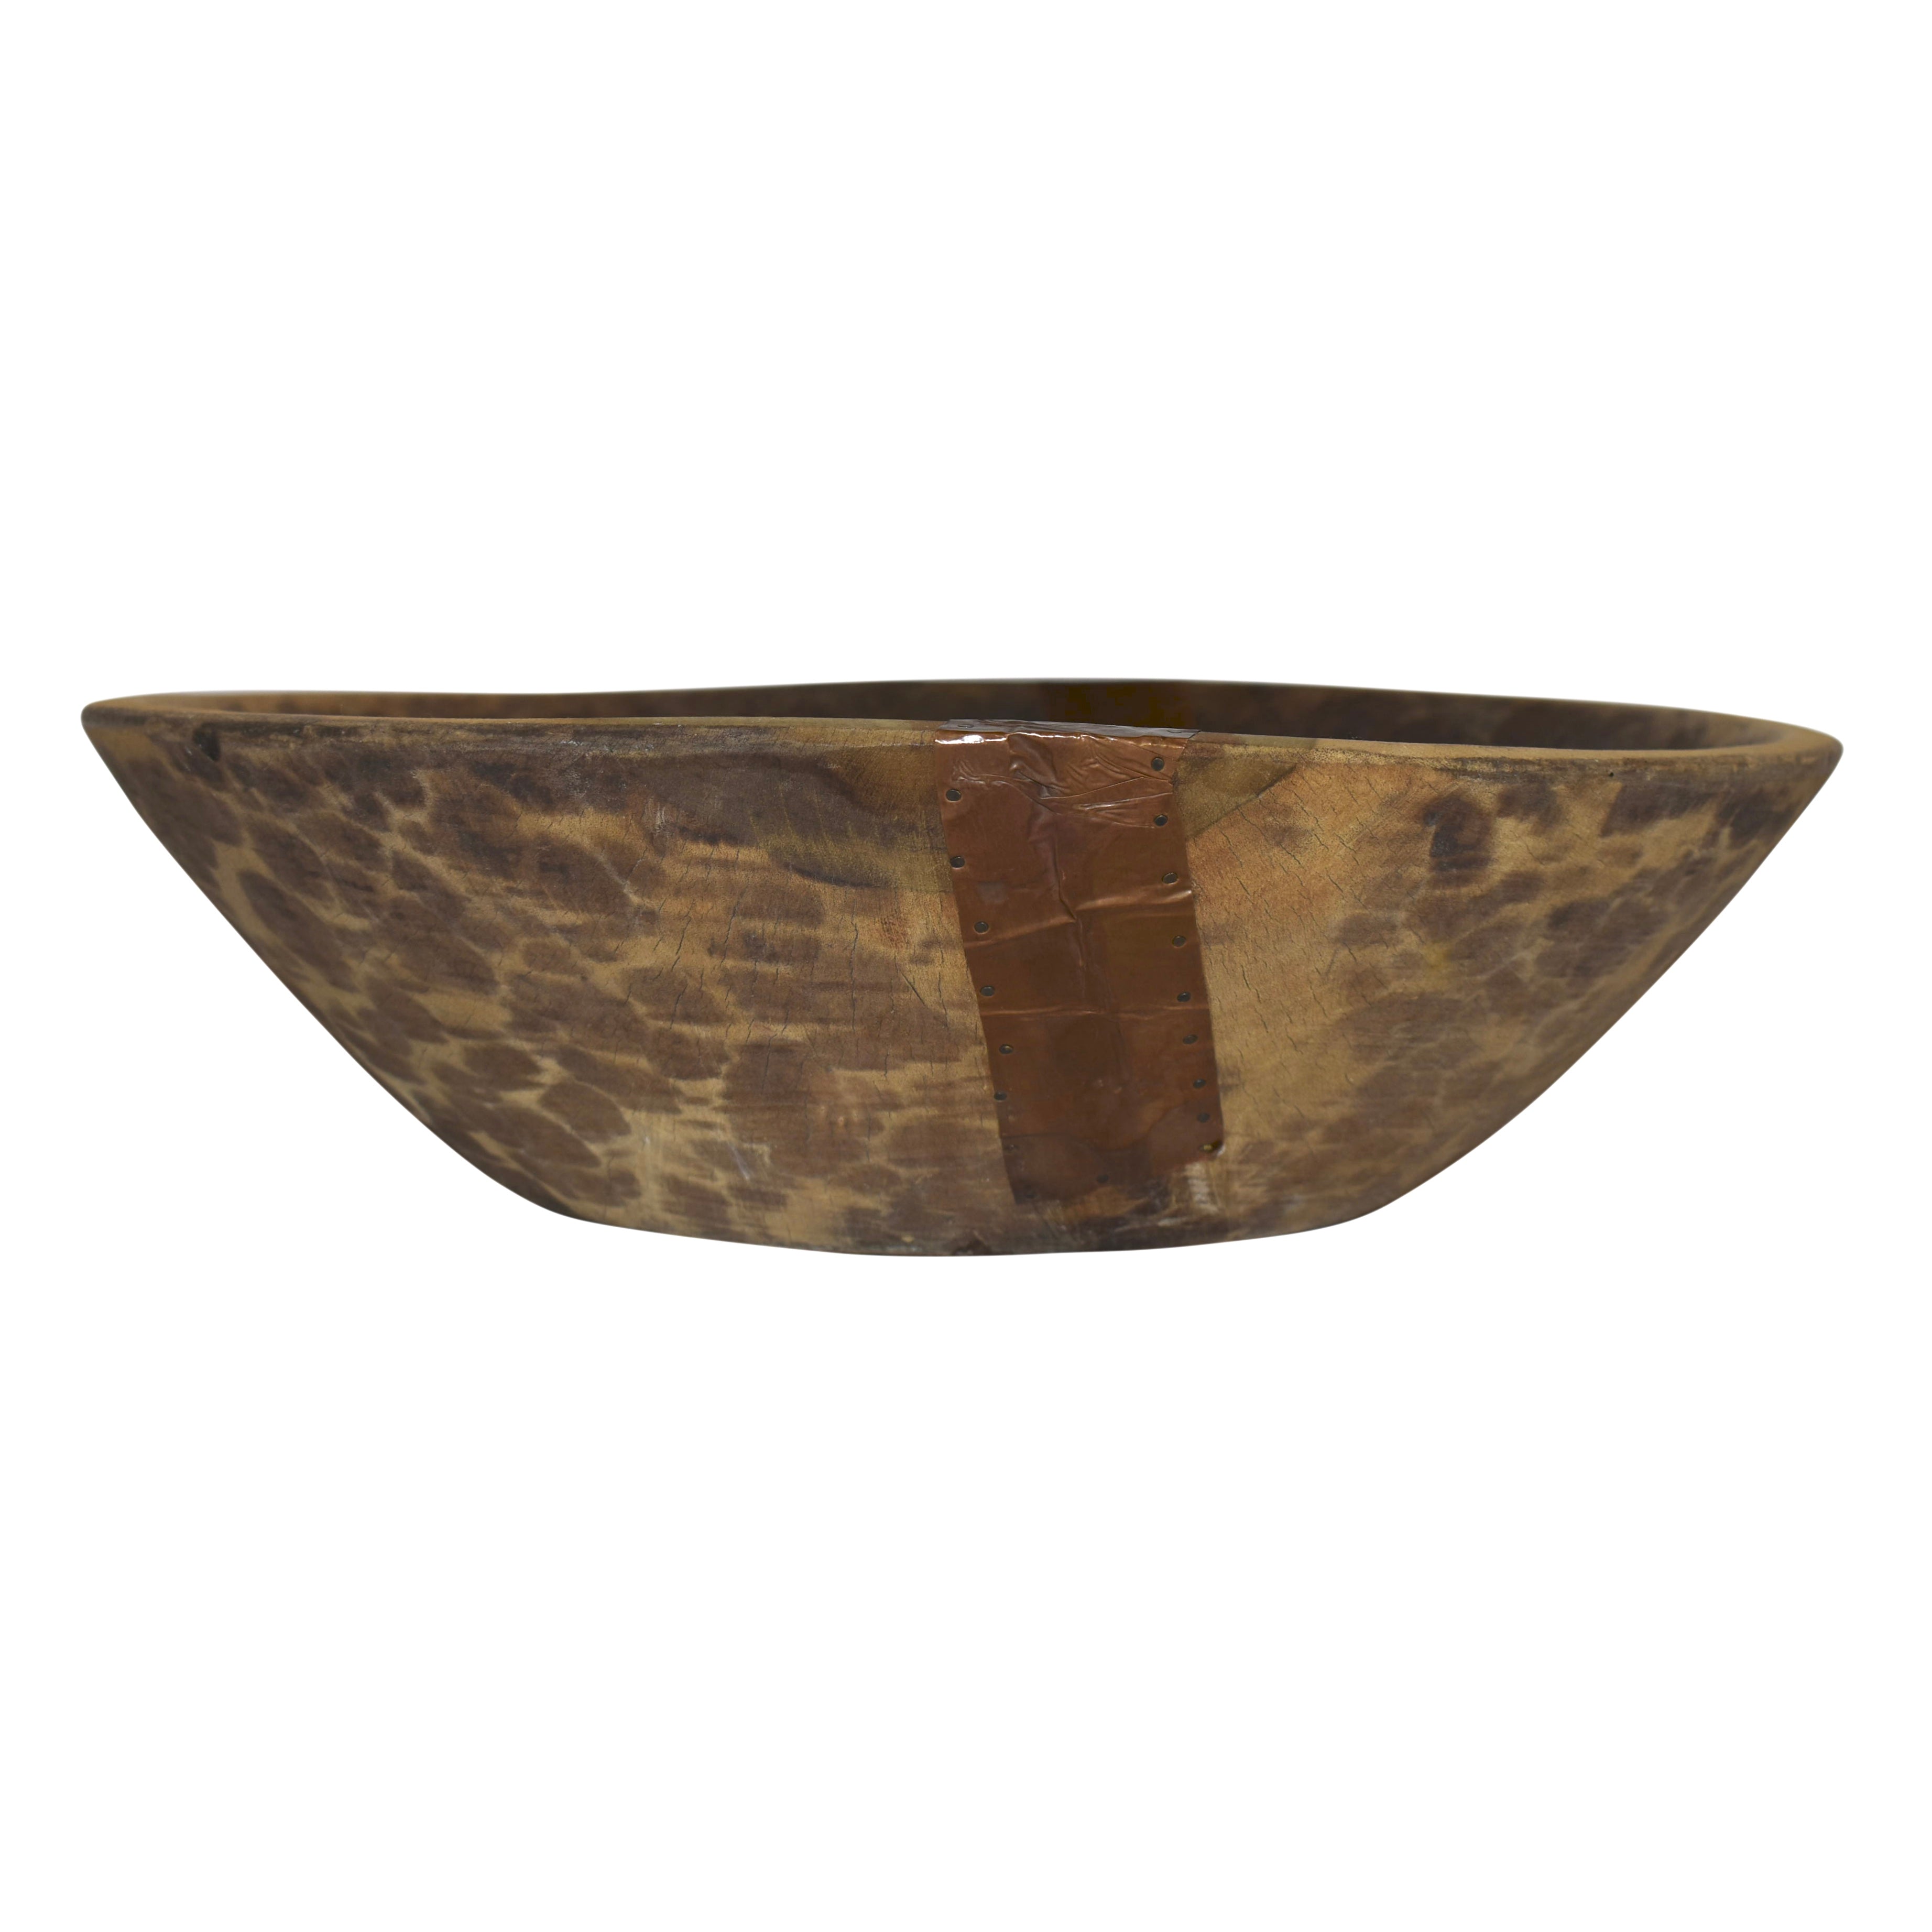 Wooden Bowl with Copper Patches